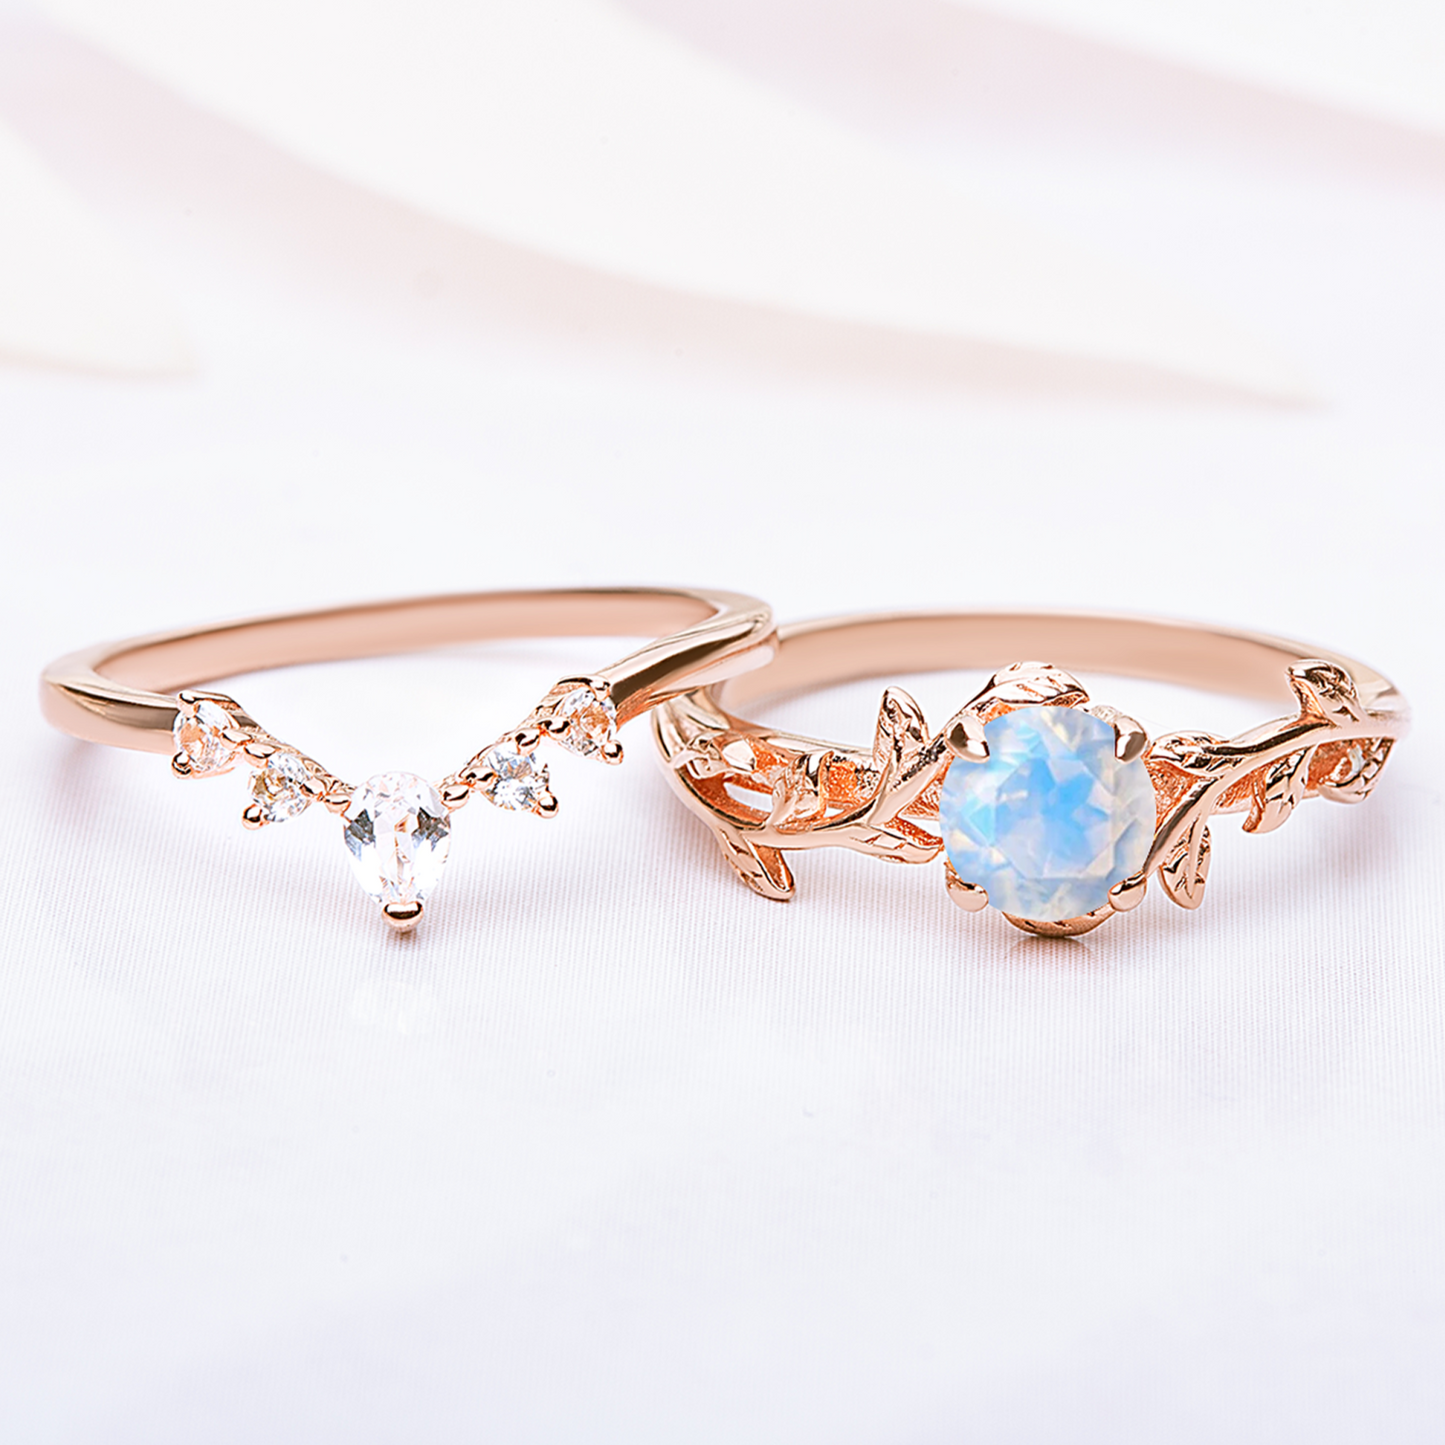 Silver Ring set for women. One ring in a form of twig with moonstone gemstone, another ring is v-shaped with zircon gemstones. Both rings are gold plated